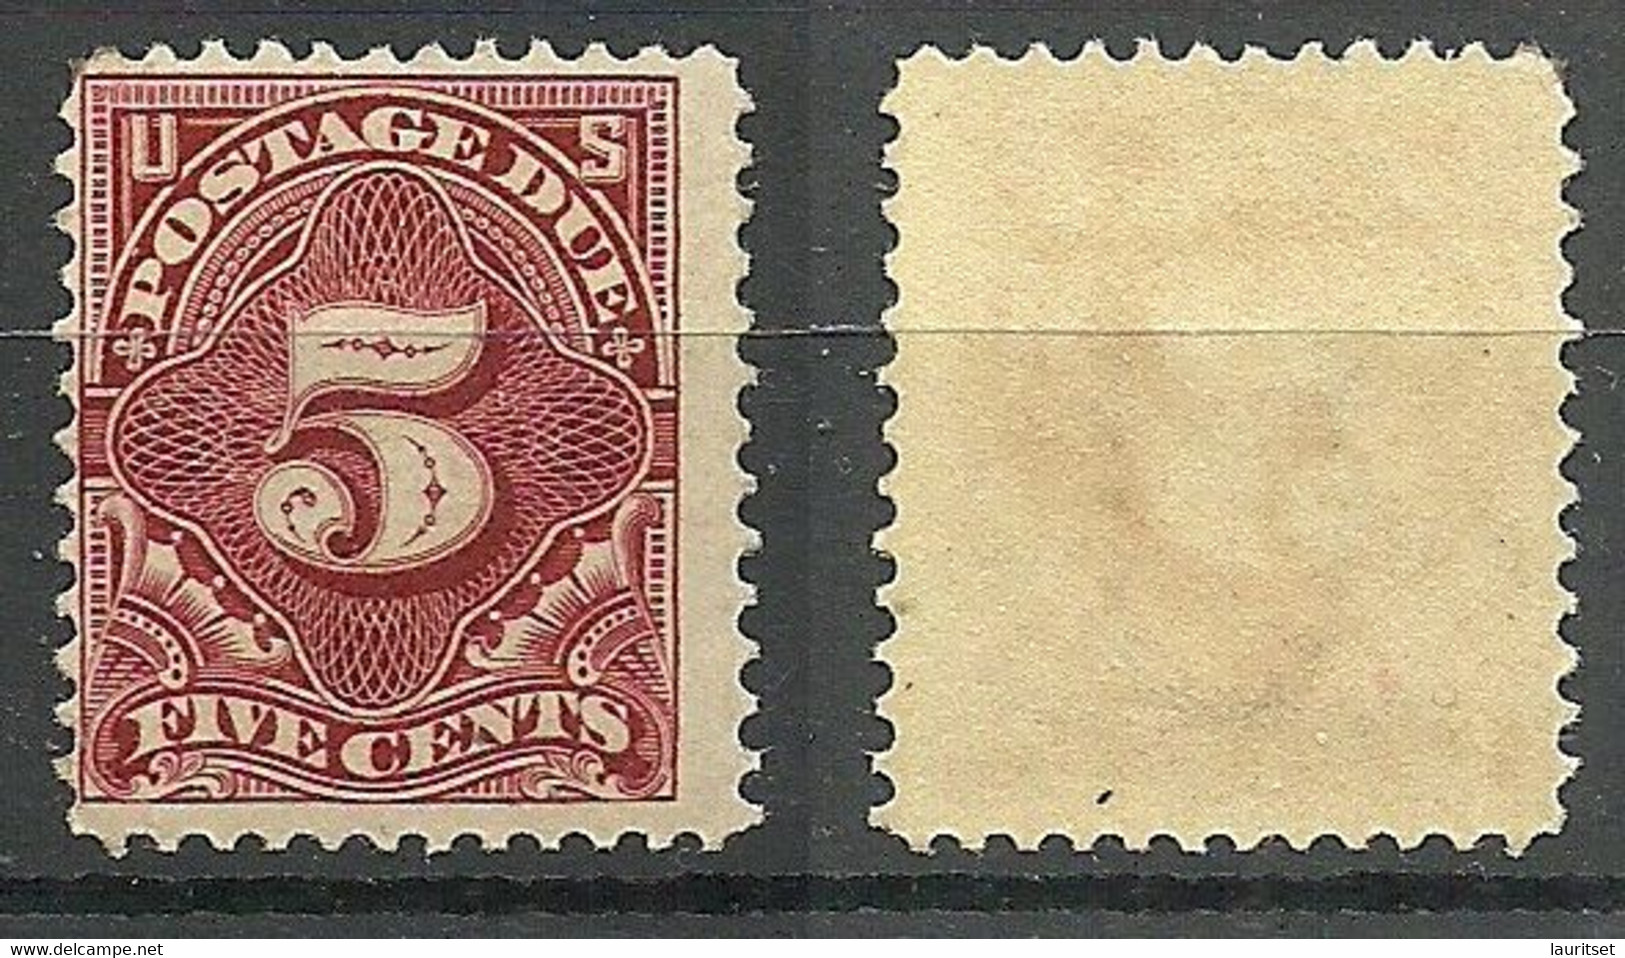 USA 1910 Postage Due Portomarke Michel 32 A (perf 12) MNH - Postage Due